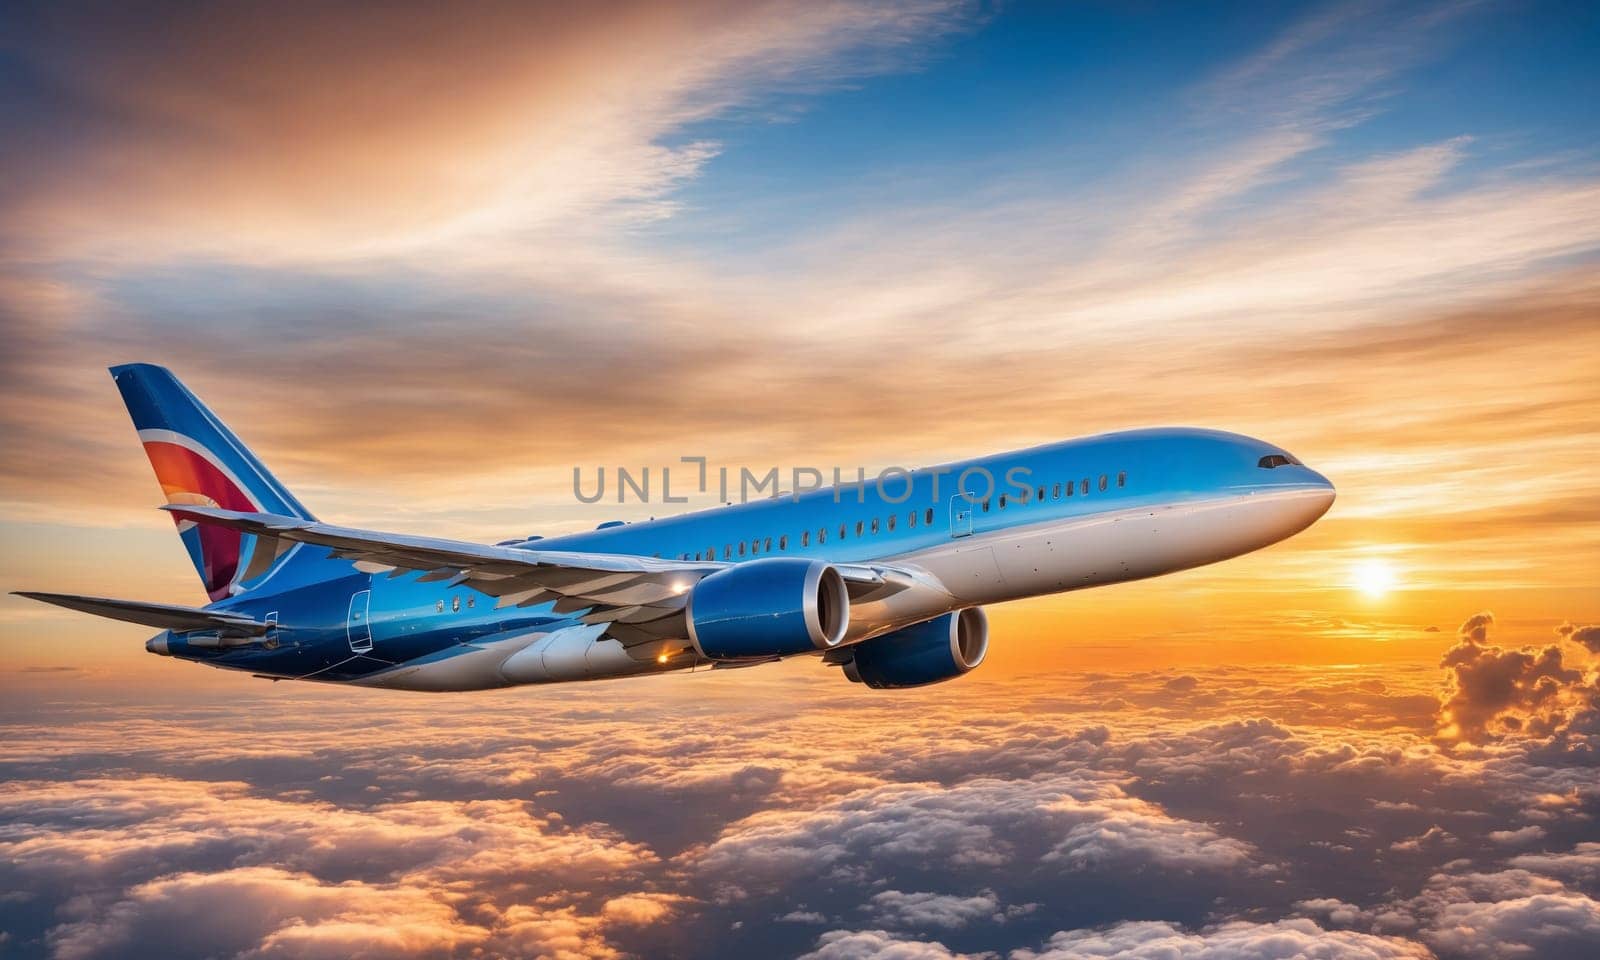 Airplane flying above the clouds at sunset by Andre1ns